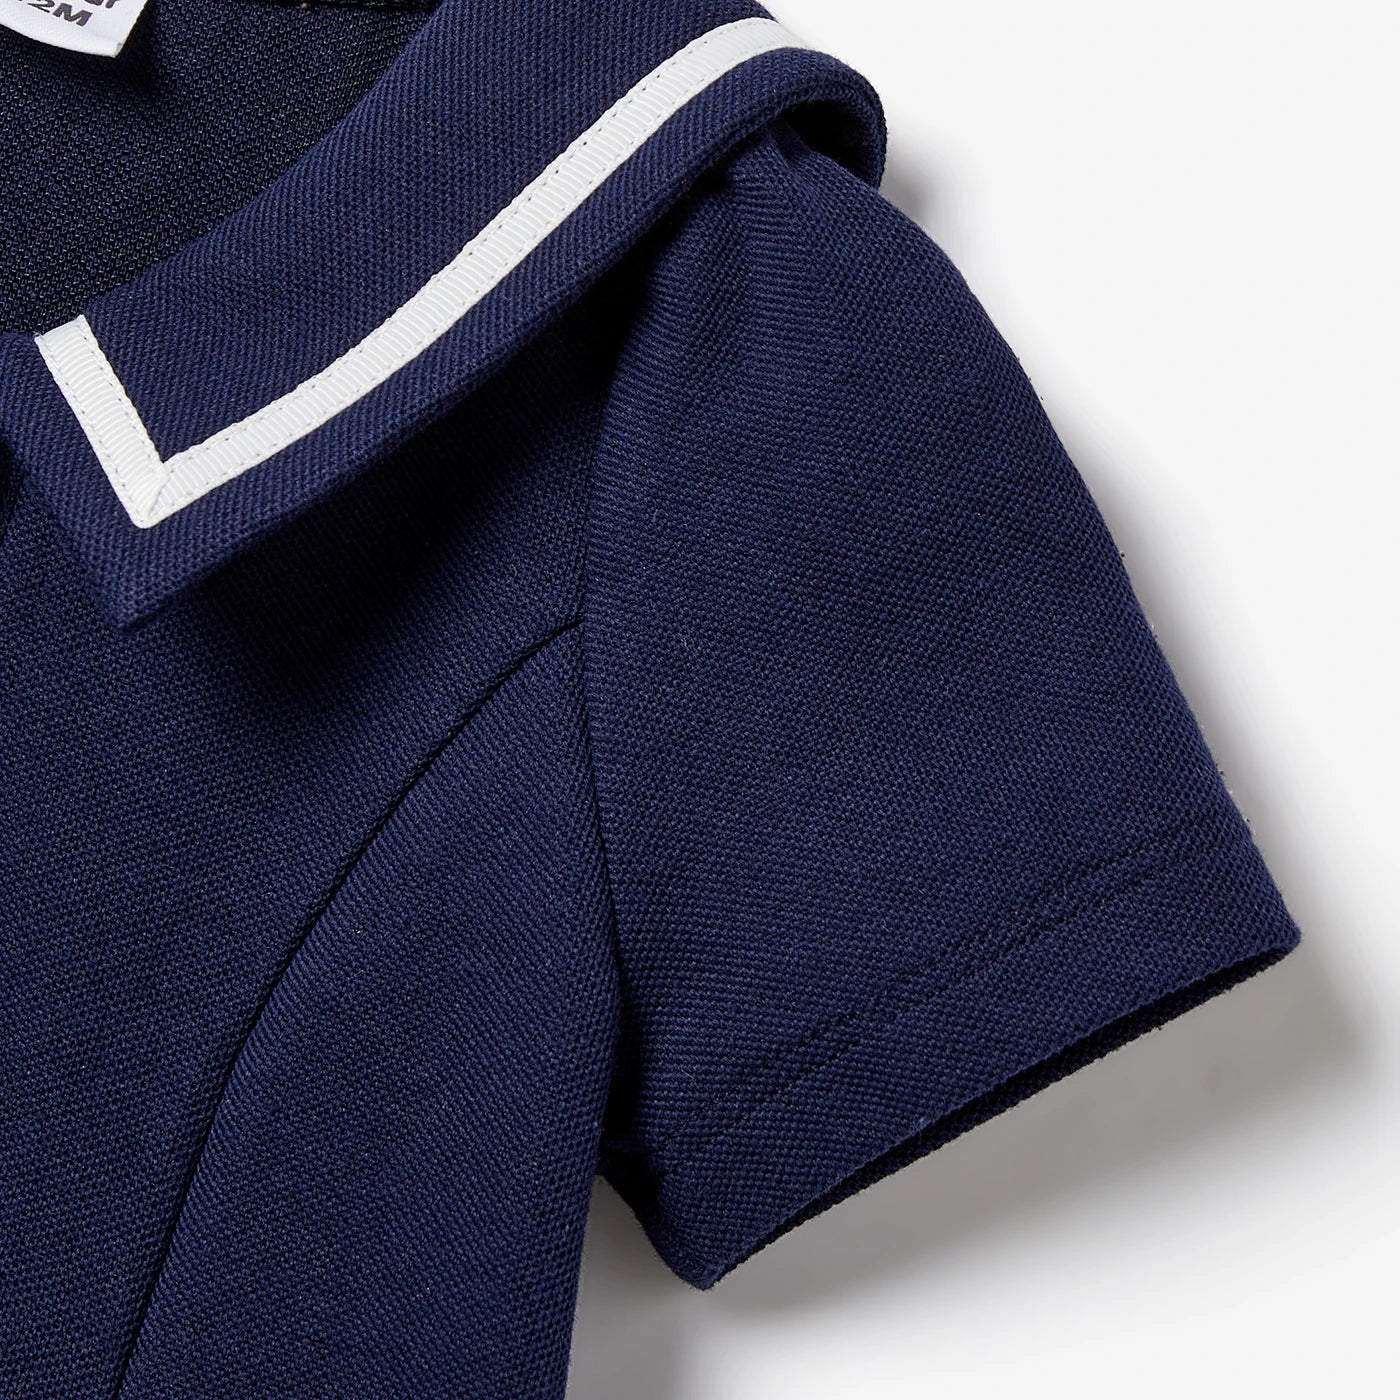 Family Matching! Navy Blue Striped Polo Shirts & Solid Sailor Hem Dresses